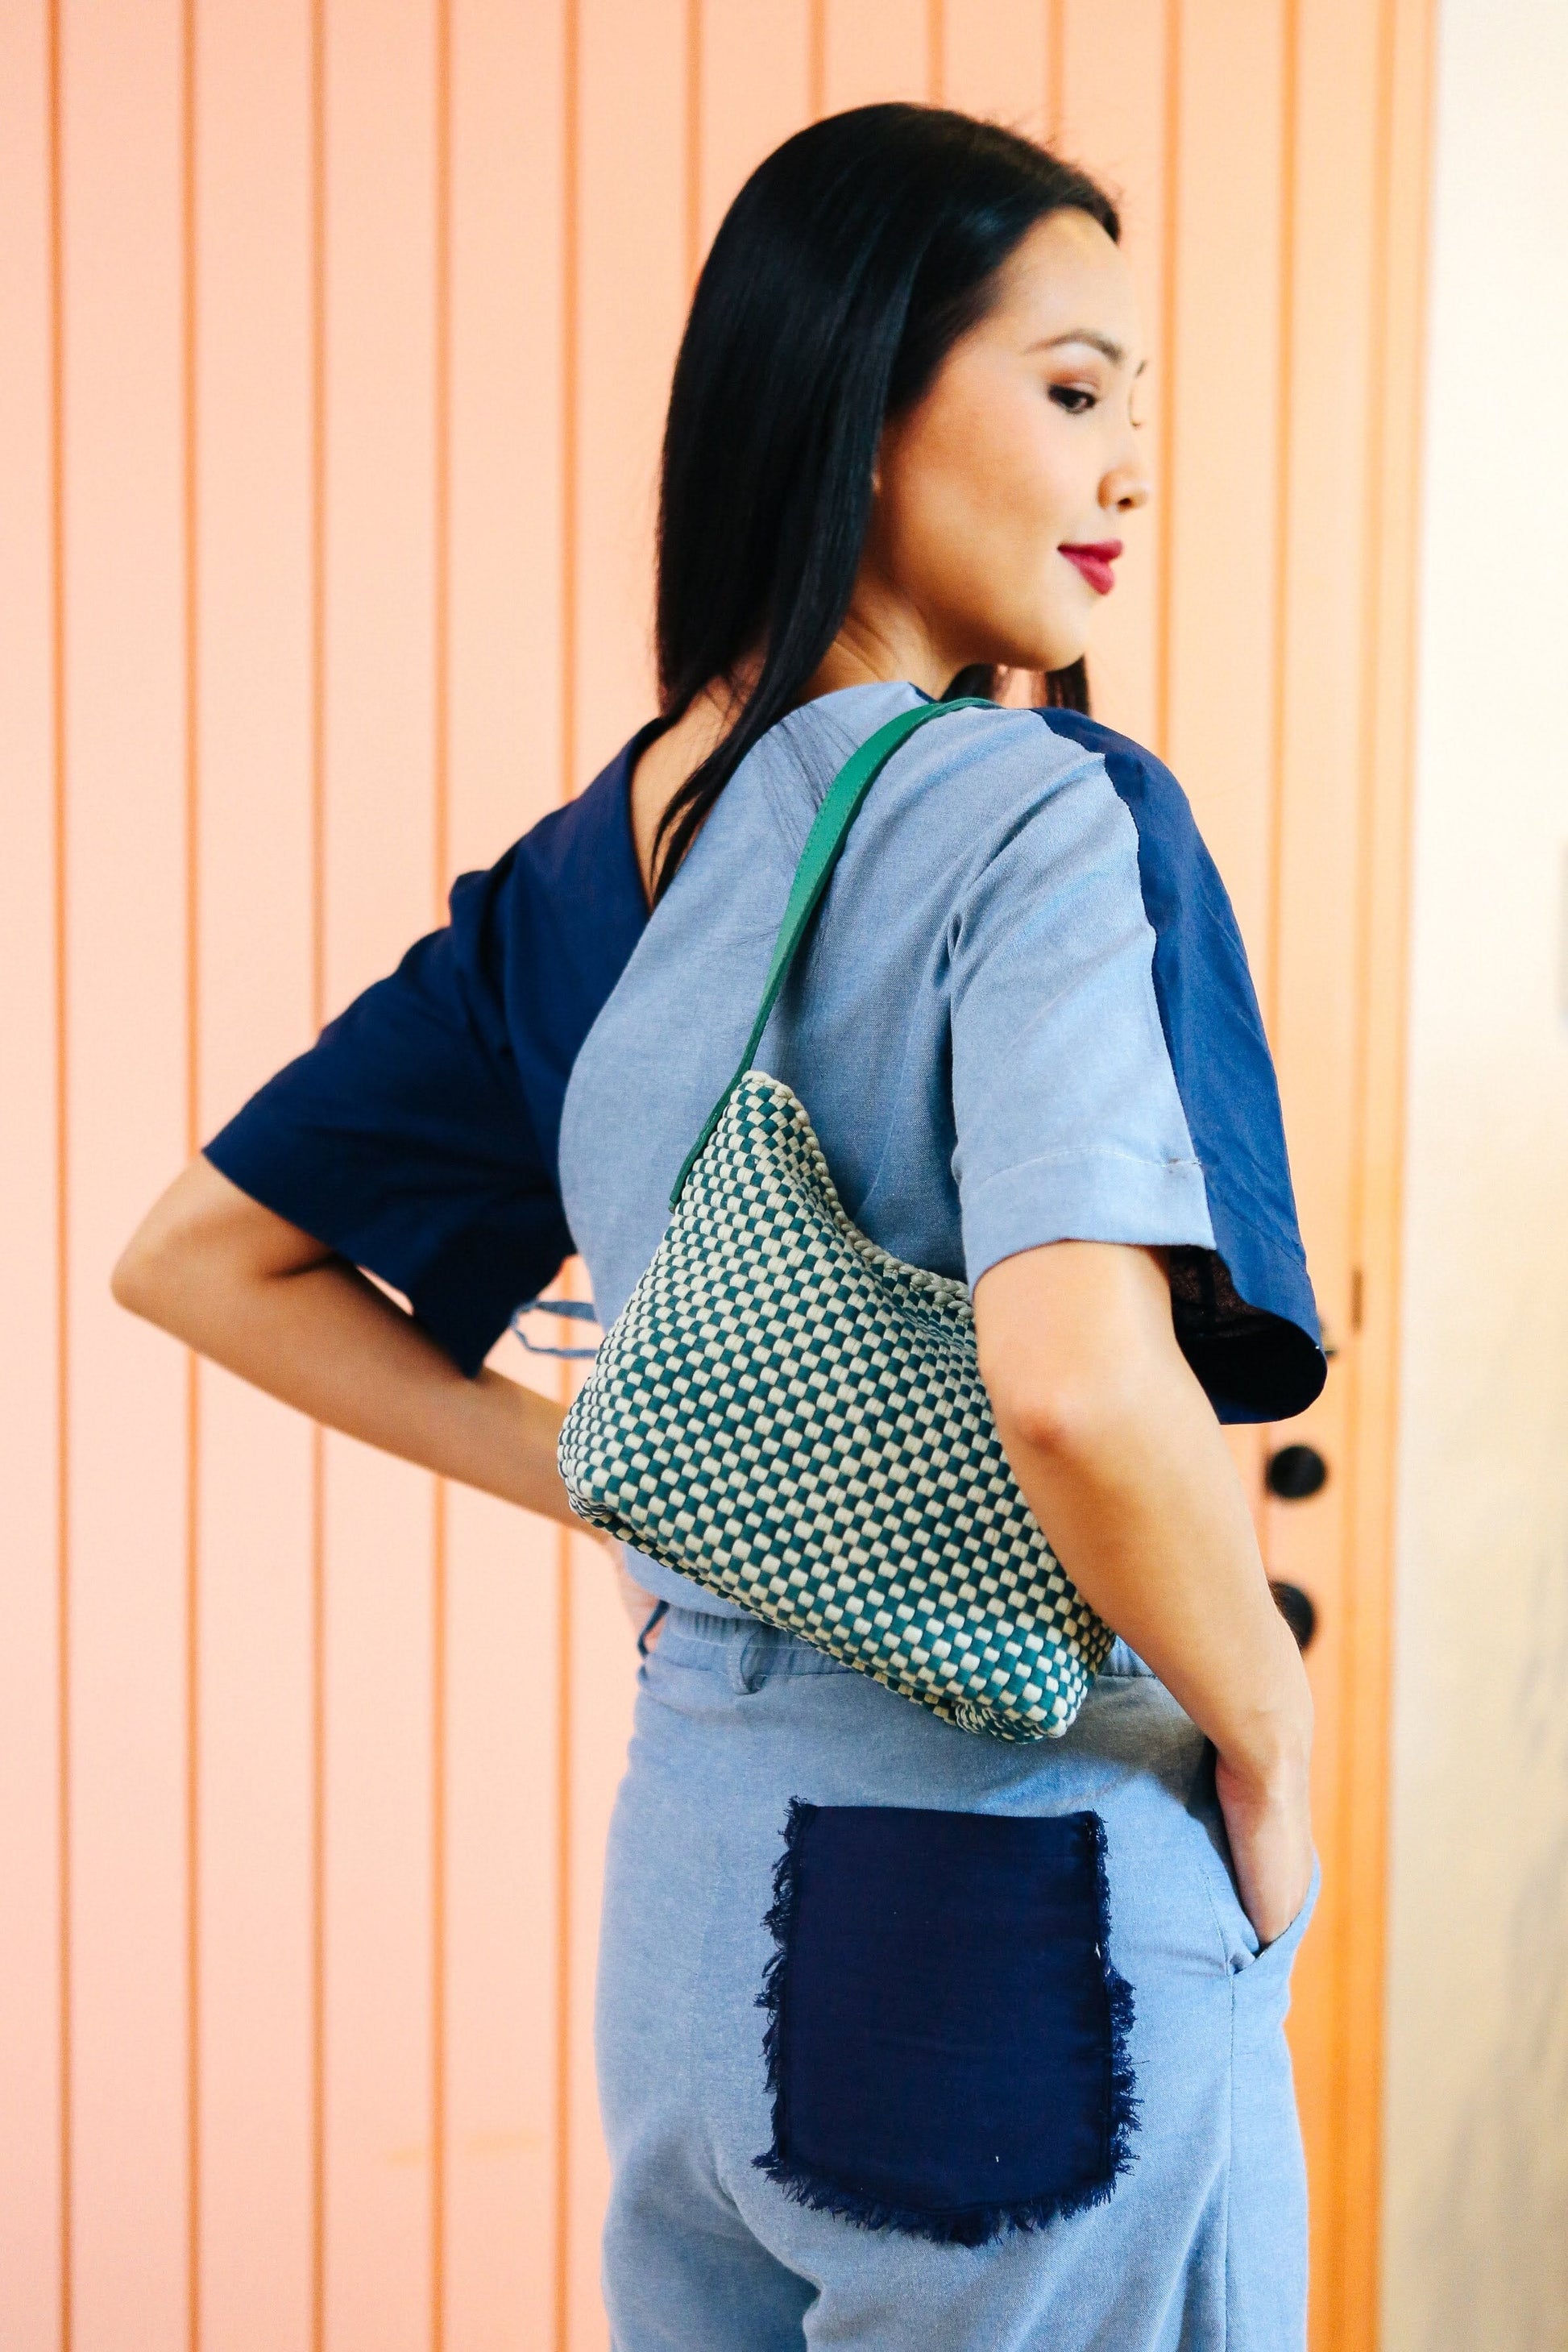 Buslo Micro Checkerboard Emerald & Sage with Longer Handles Fashion Rags2Riches